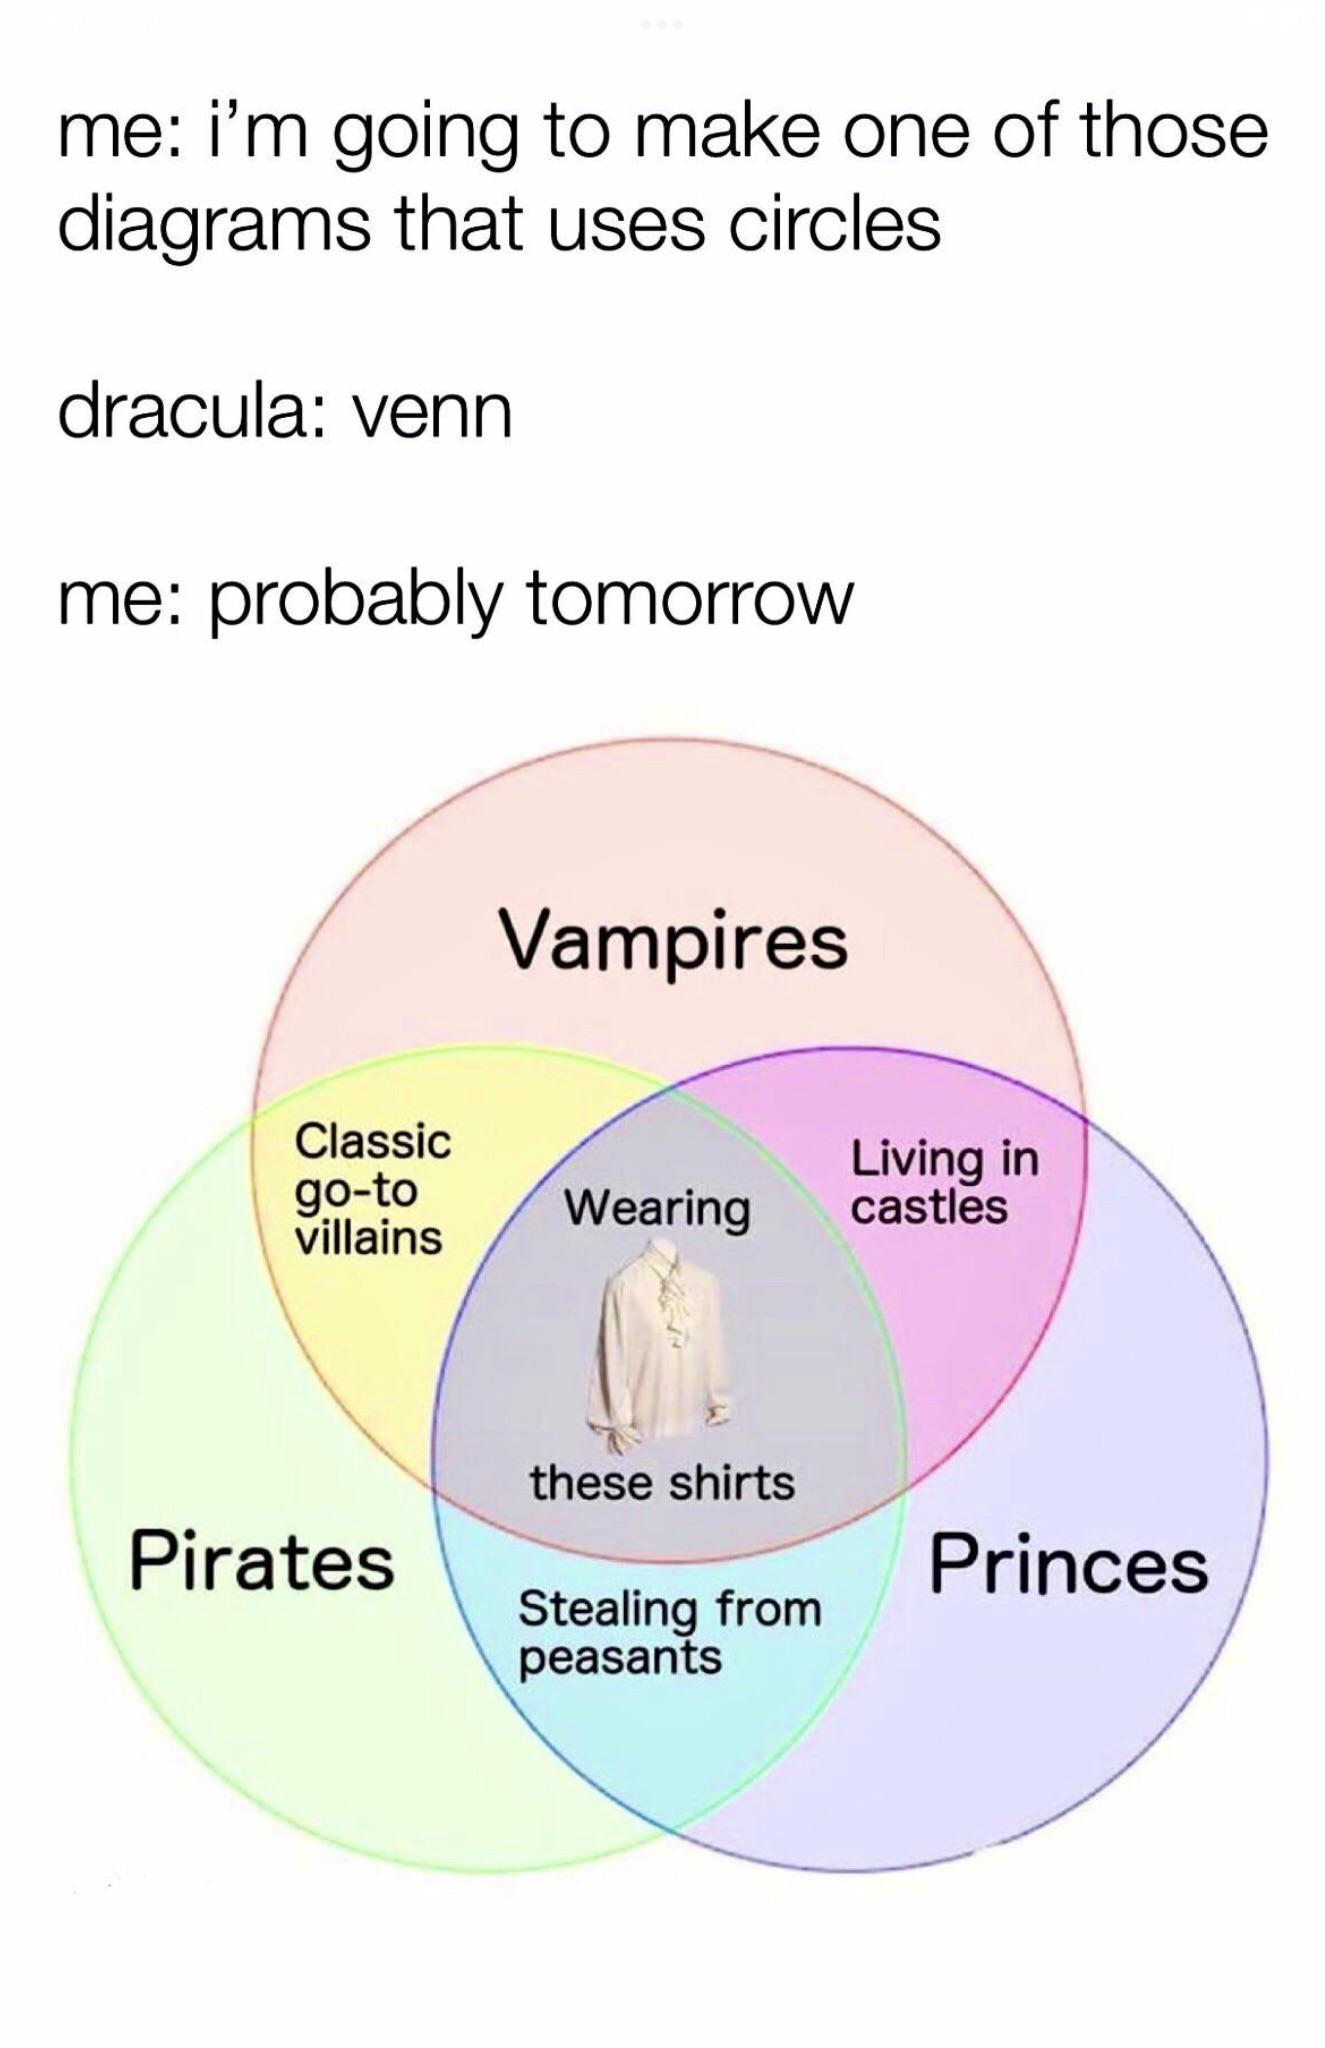 cartoon - me i'm going to make one of those diagrams that uses circles dracula venn me probably tomorrow Vampires Classic goto villains Wearing Living in castles these shirts Pirates Princes Stealing from peasants